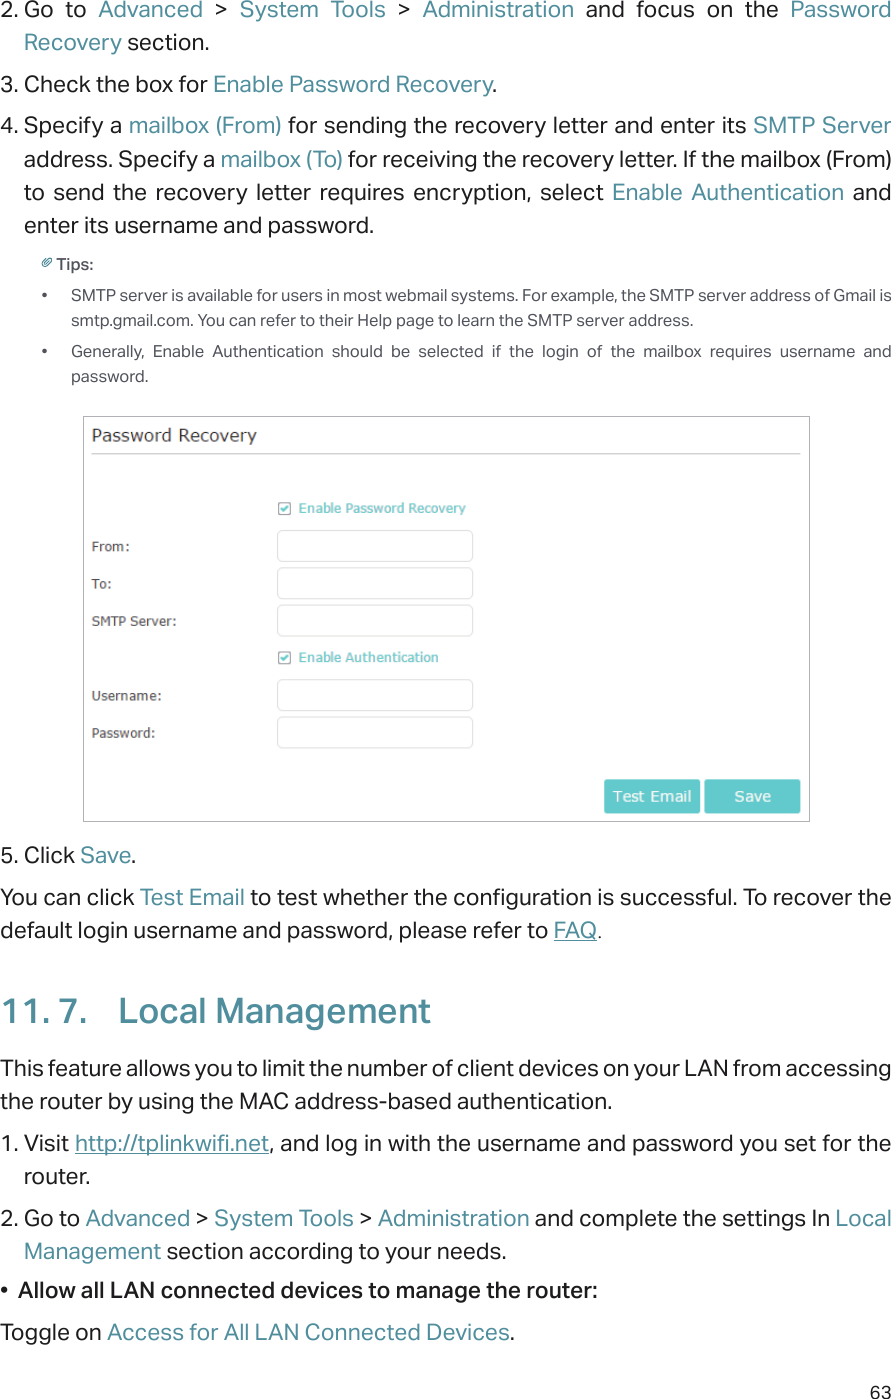 632. Go to Advanced &gt; System Tools &gt;  Administration and focus on the Password Recovery section.3. Check the box for Enable Password Recovery.4. Specify a mailbox (From) for sending the recovery letter and enter its SMTP Server address. Specify a mailbox (To) for receiving the recovery letter. If the mailbox (From) to send the recovery letter requires encryption, select Enable Authentication and enter its username and password.Tips: •  SMTP server is available for users in most webmail systems. For example, the SMTP server address of Gmail is smtp.gmail.com. You can refer to their Help page to learn the SMTP server address. •  Generally, Enable Authentication should be selected if the login of the mailbox requires username and password. 5. Click Save.You can click Test Email to test whether the configuration is successful. To recover the default login username and password, please refer to FAQ.11. 7.  Local ManagementThis feature allows you to limit the number of client devices on your LAN from accessing the router by using the MAC address-based authentication.1. Visit http://tplinkwifi.net, and log in with the username and password you set for the router.2. Go to Advanced &gt; System Tools &gt; Administration and complete the settings In Local Management section according to your needs.•  Allow all LAN connected devices to manage the router: Toggle on Access for All LAN Connected Devices.